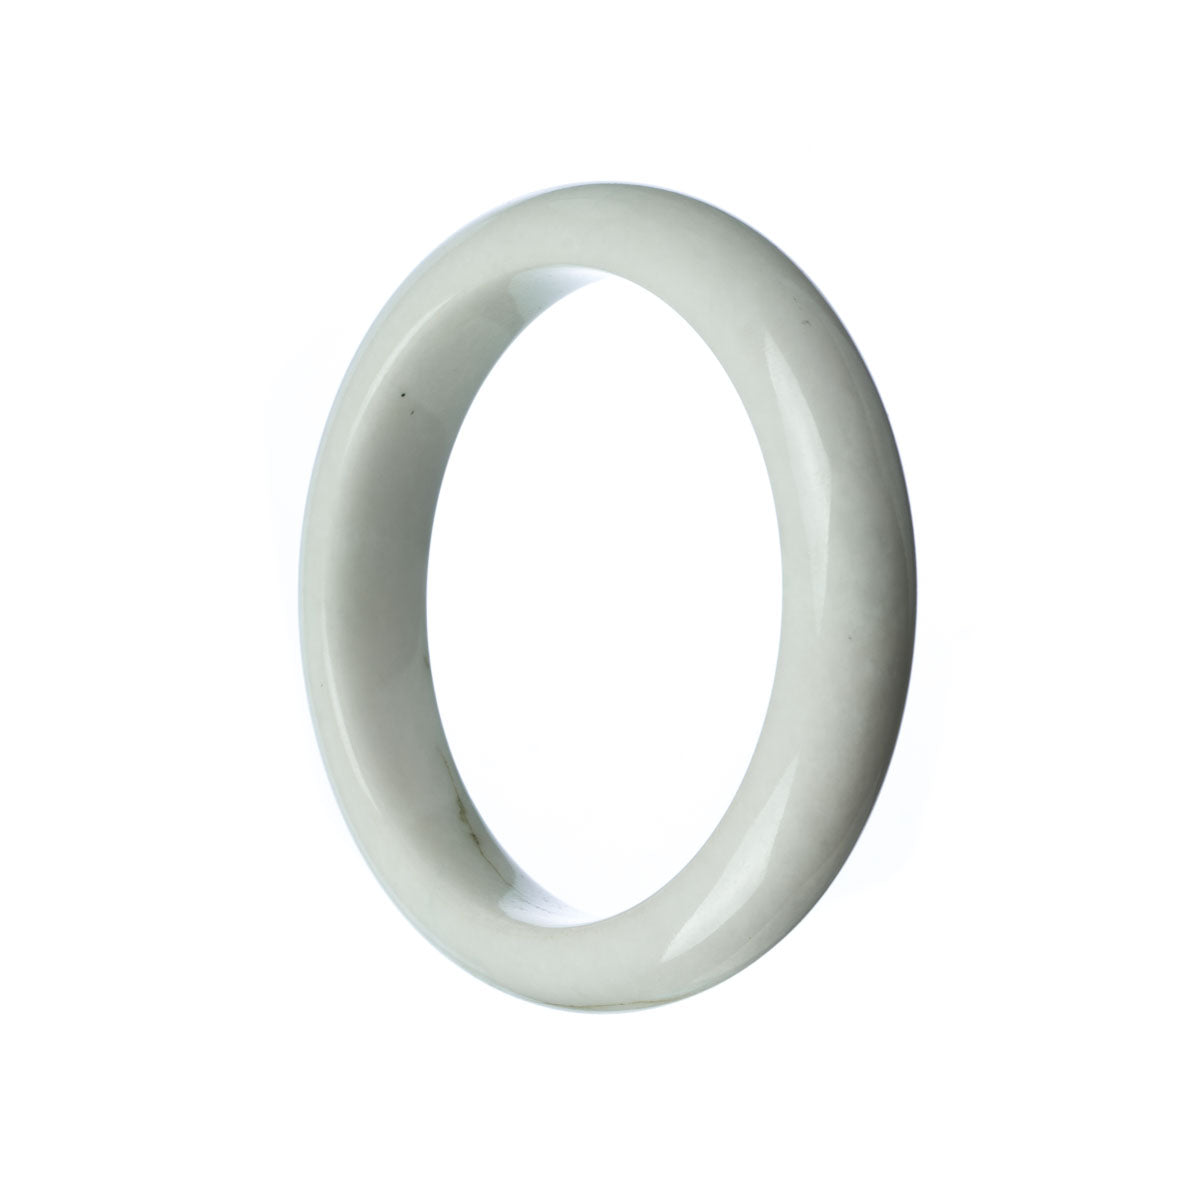 A white jade bracelet with a half moon design, crafted from genuine Grade A jade.